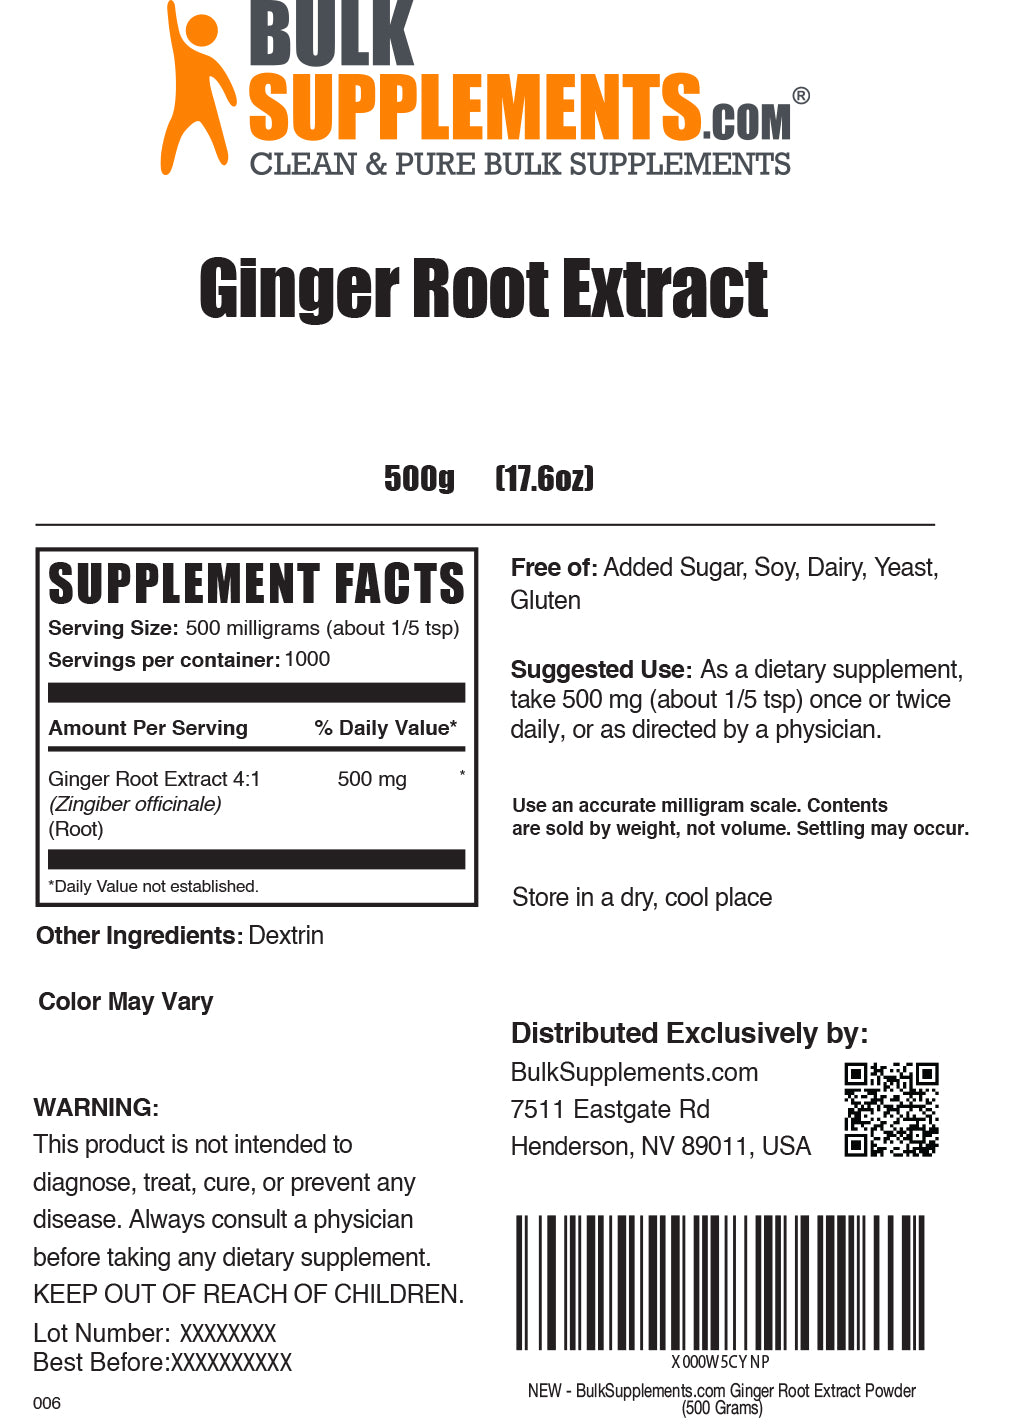 Ginger Root Extract Powder 500g Label